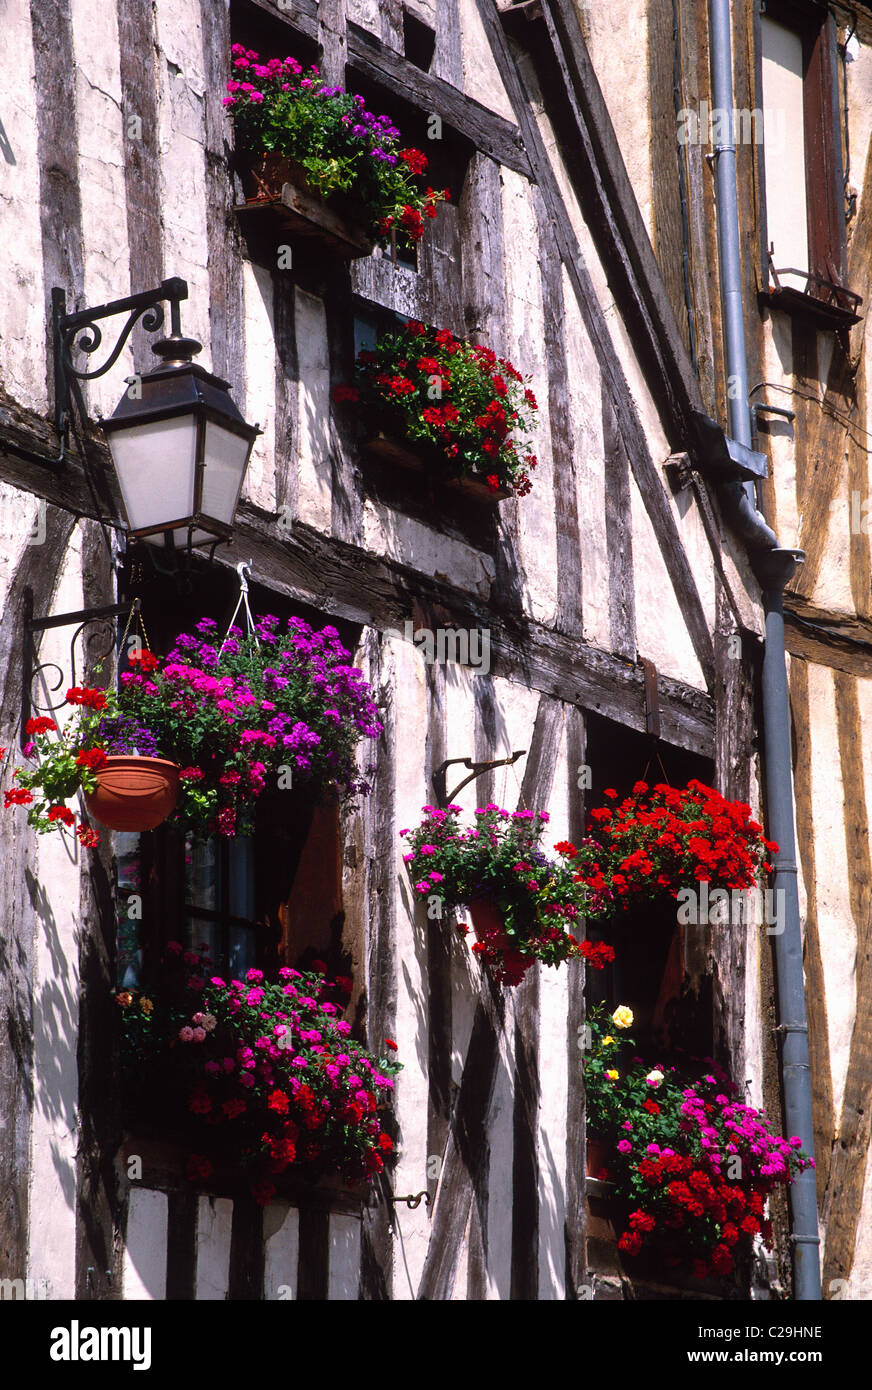 Flower boxes brighten the historic Tudor Style homes in the medieval town of Auxerre, France Stock Photo